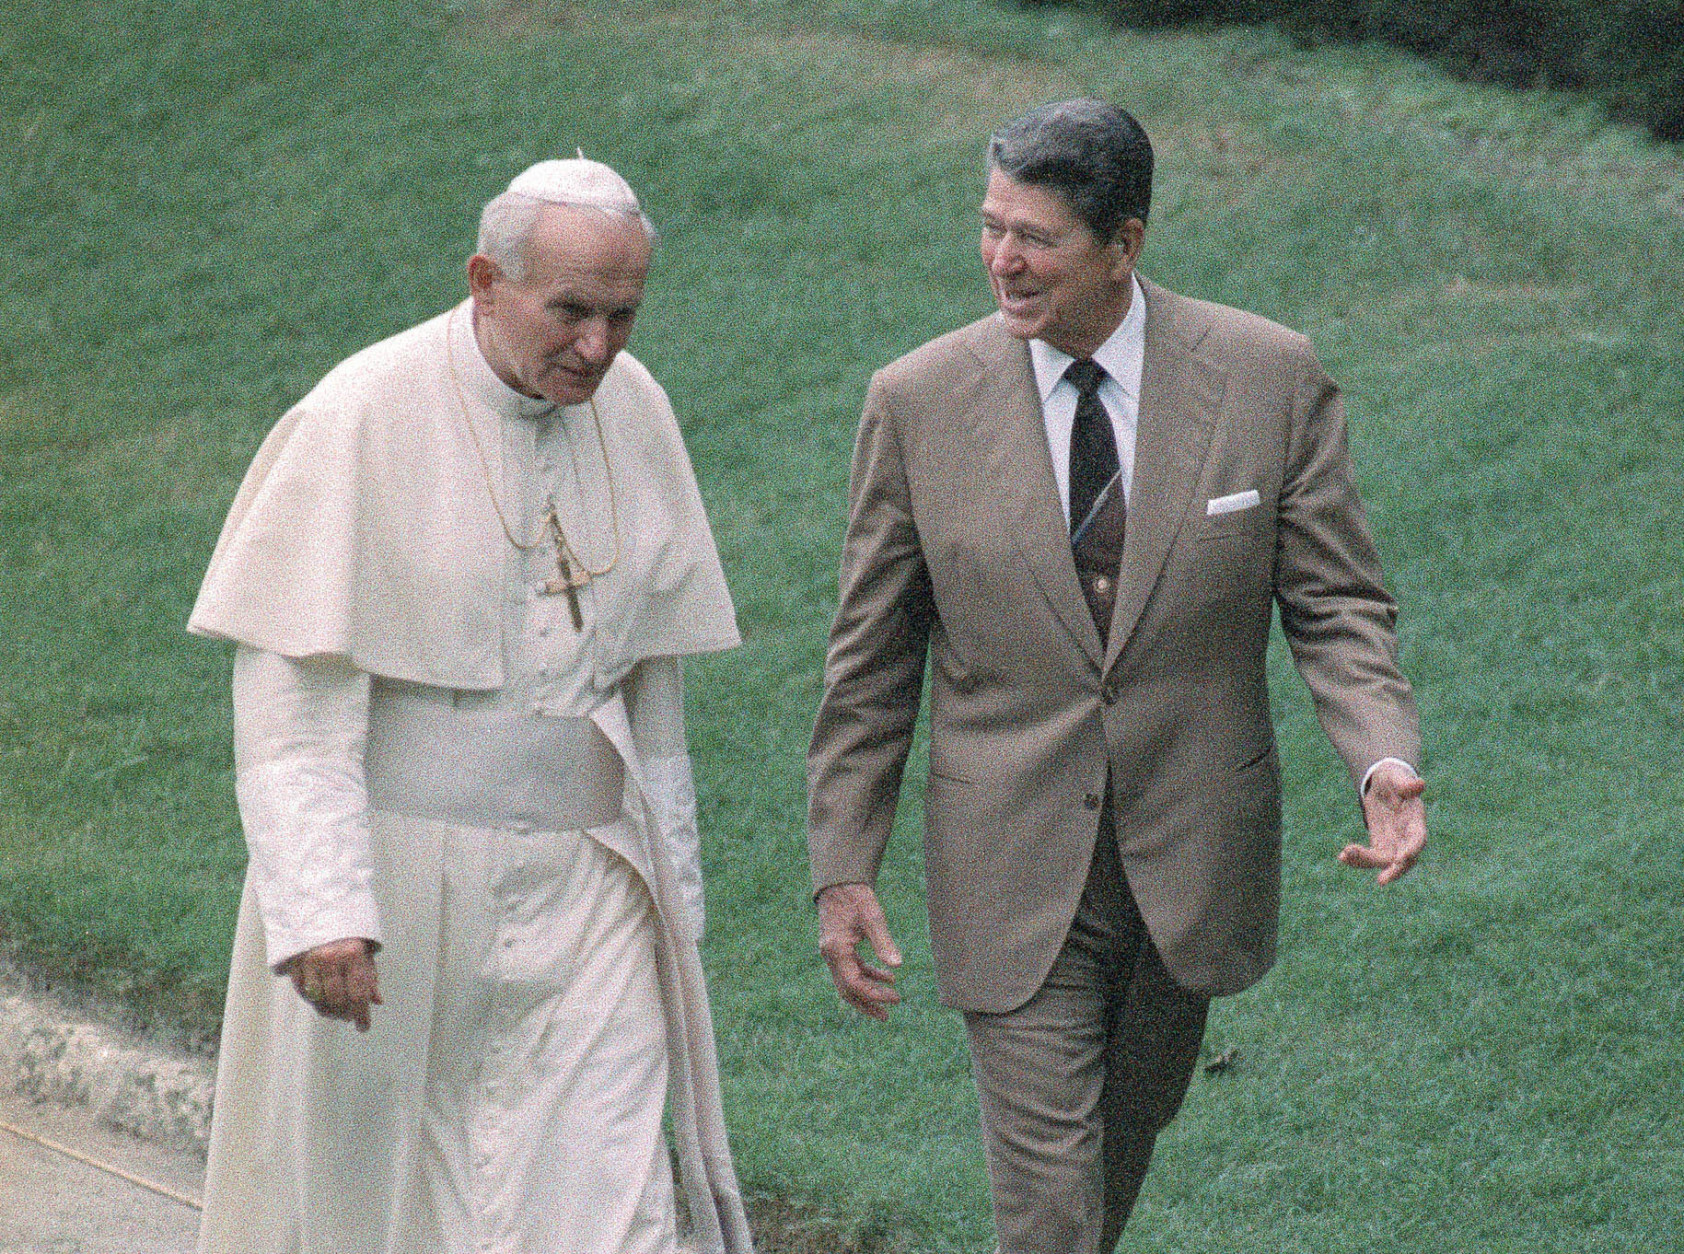 On this date in 1987, Pope John Paul II arrived in Miami, where he was welcomed by President Ronald Reagan and first lady Nancy Reagan as he began a 10-day tour of the United States. (AP Photo/Scott Stewart, File)